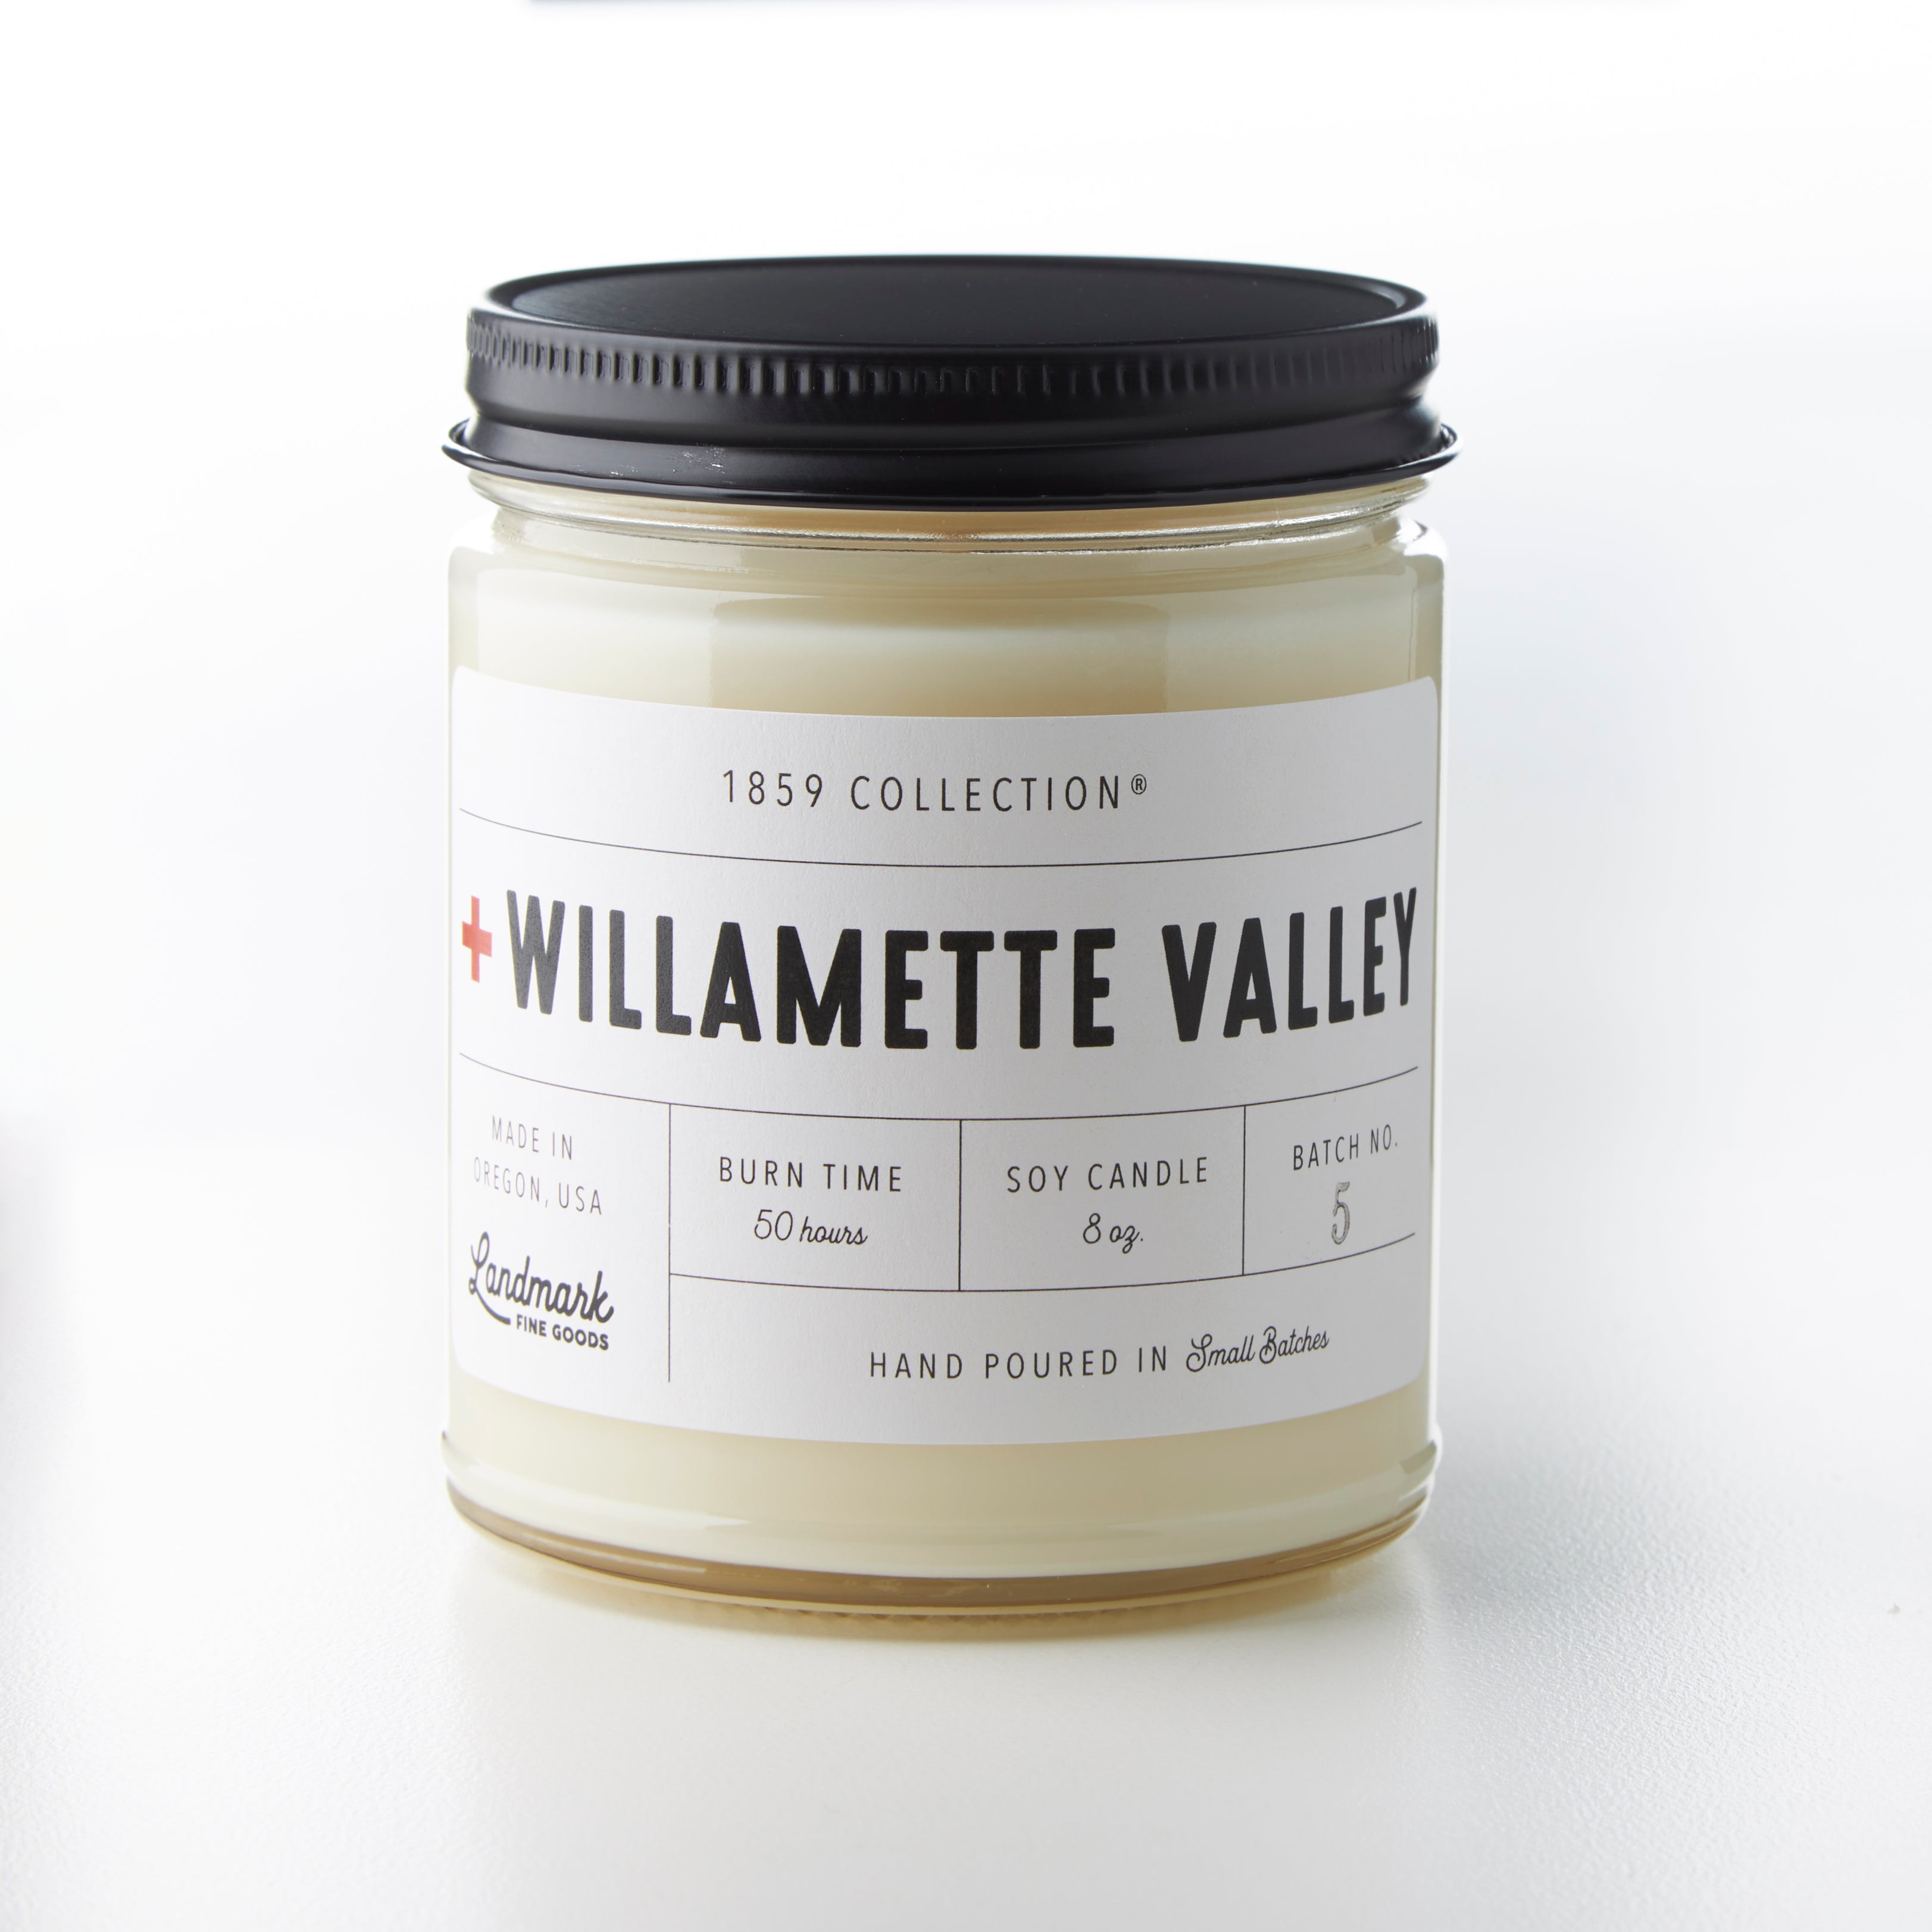 Willamette Valley Candle - 1859 Collection®